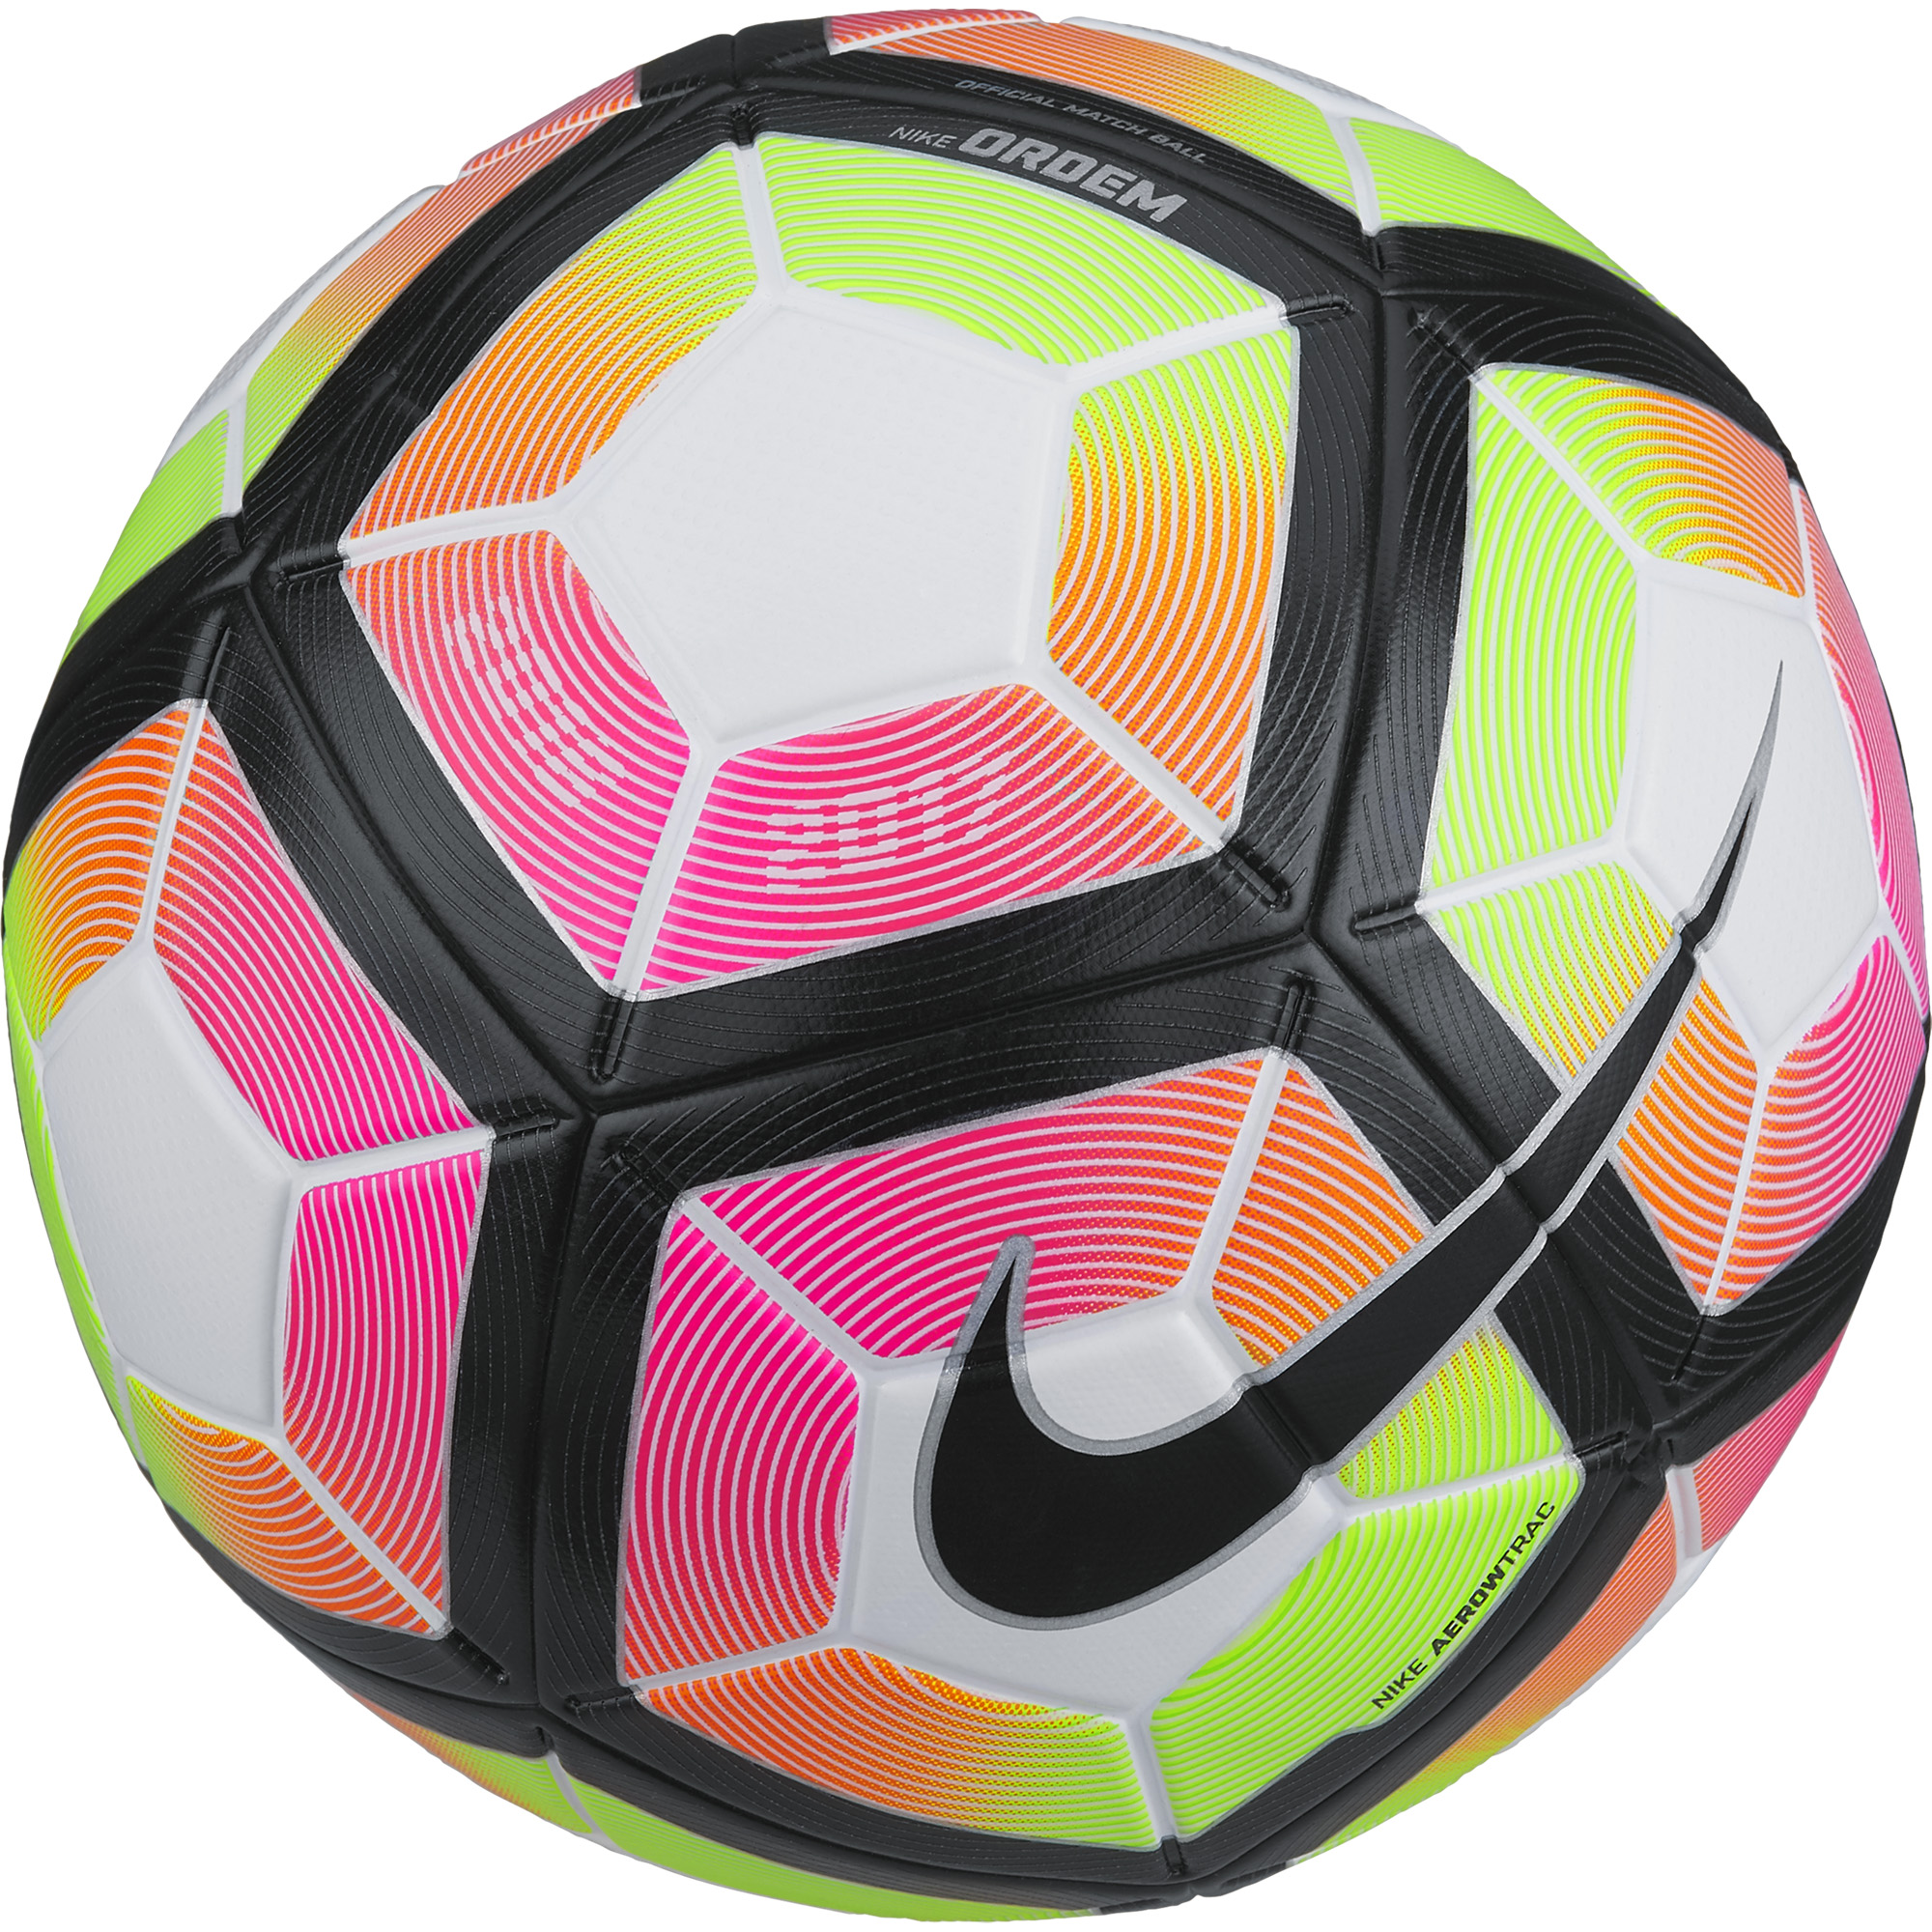 List 93+ Pictures Pictures Of Nike Soccer Balls Stunning